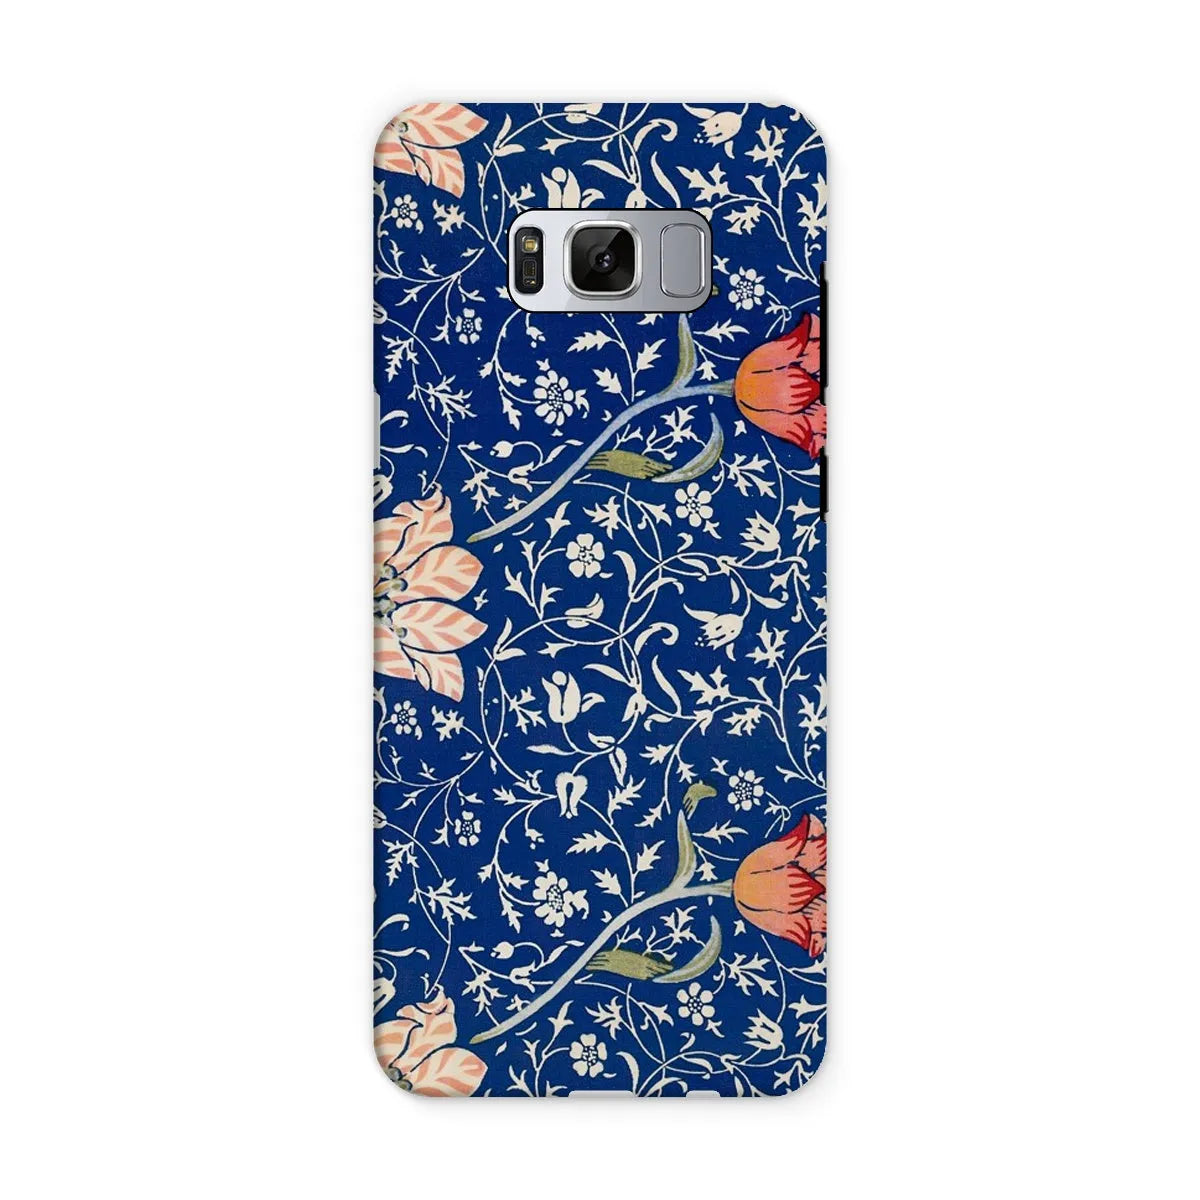 Medway - Floral Aesthetic Art Phone Case - William Morris - Samsung Galaxy S8 / Matte - Mobile Phone Cases - Aesthetic